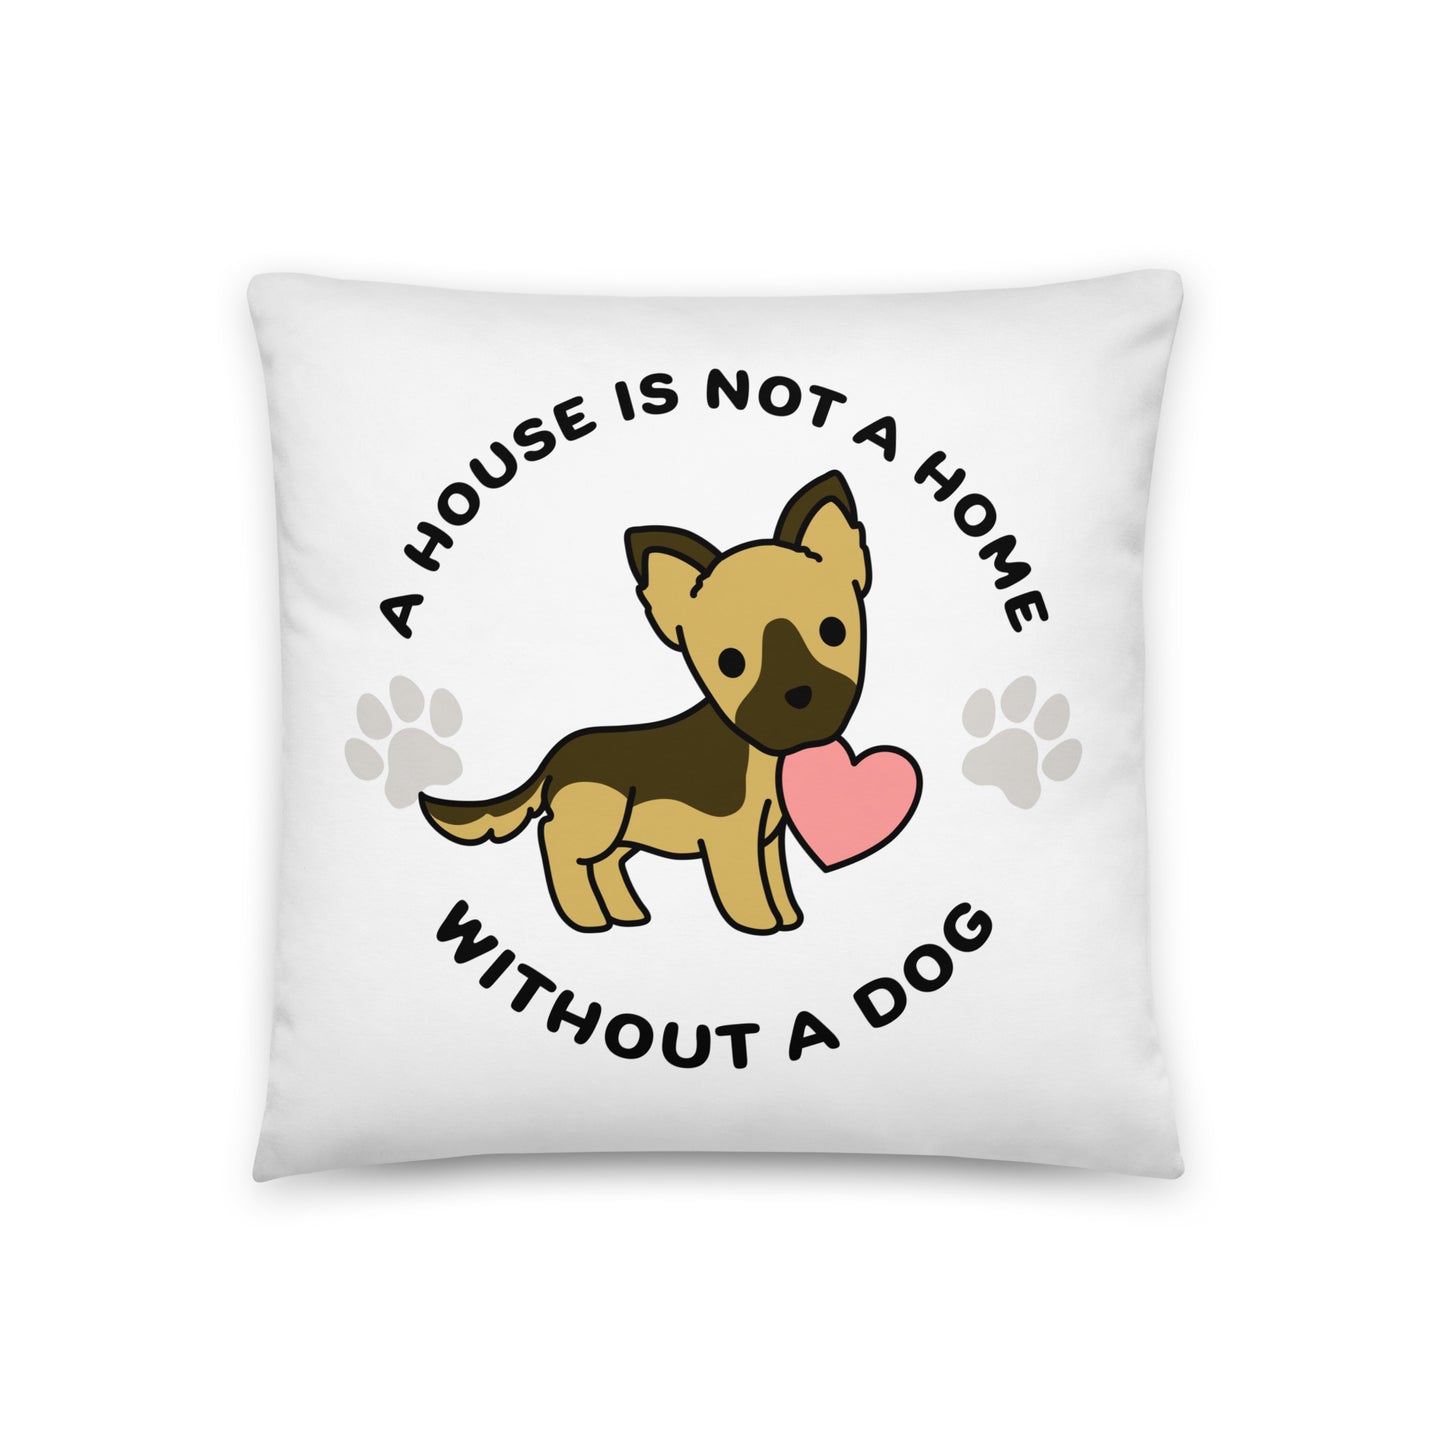 A white, 18" x 18" pillow featuing a cute, stylized illustration of a German Shepherd holding a heart in its mouth. Text in a circle around the dog reads "A house is not a home without a dog"